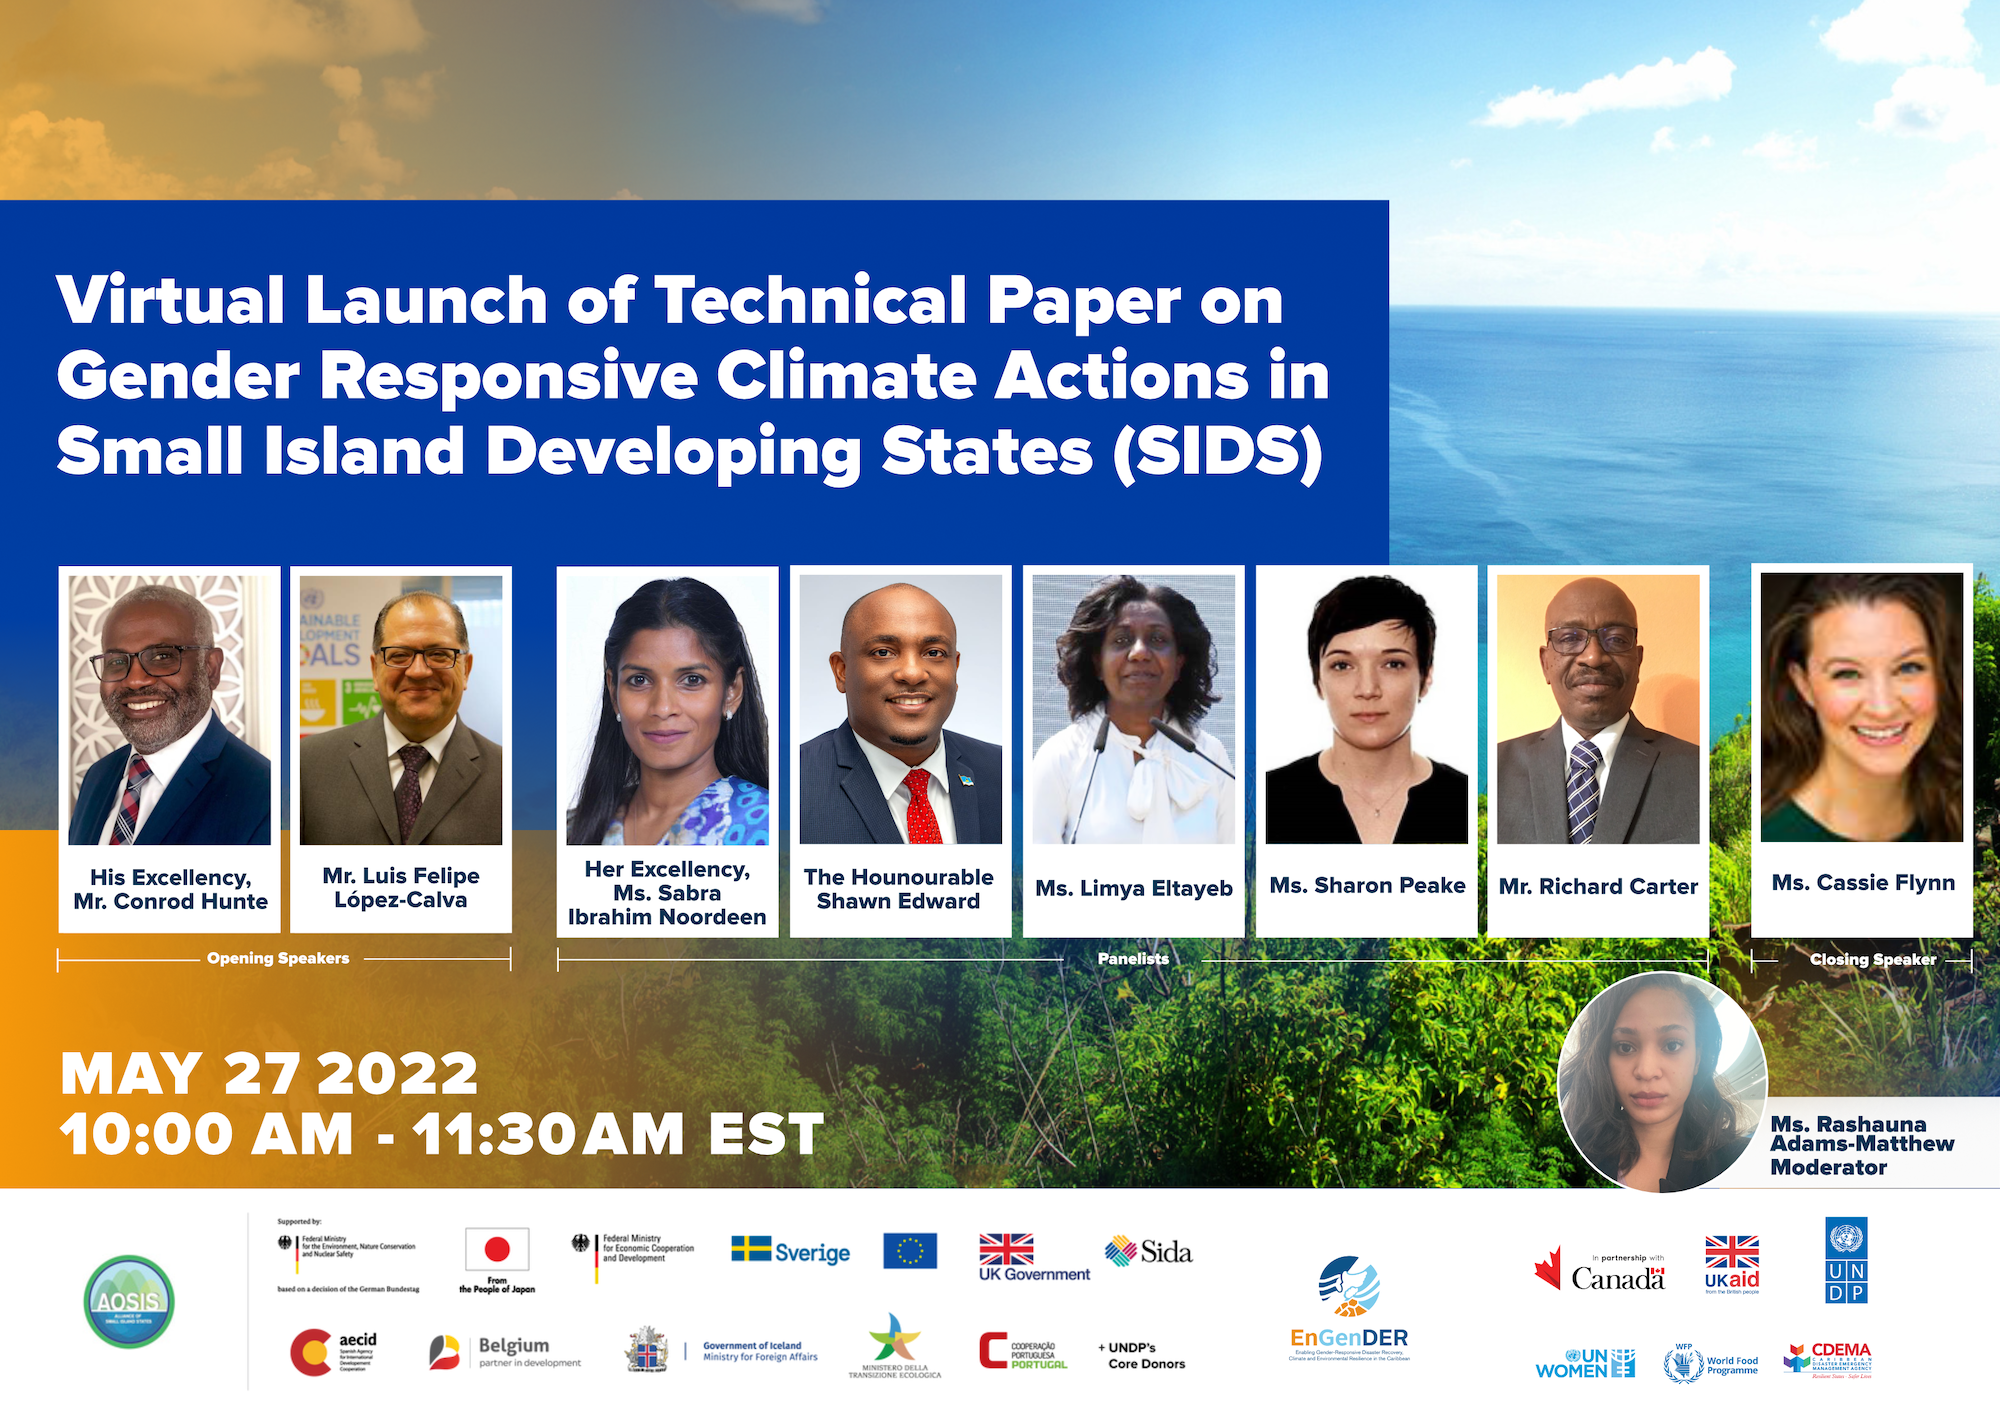 Launch of Technical Paper on Gender-Responsive Climate Action in SIDS